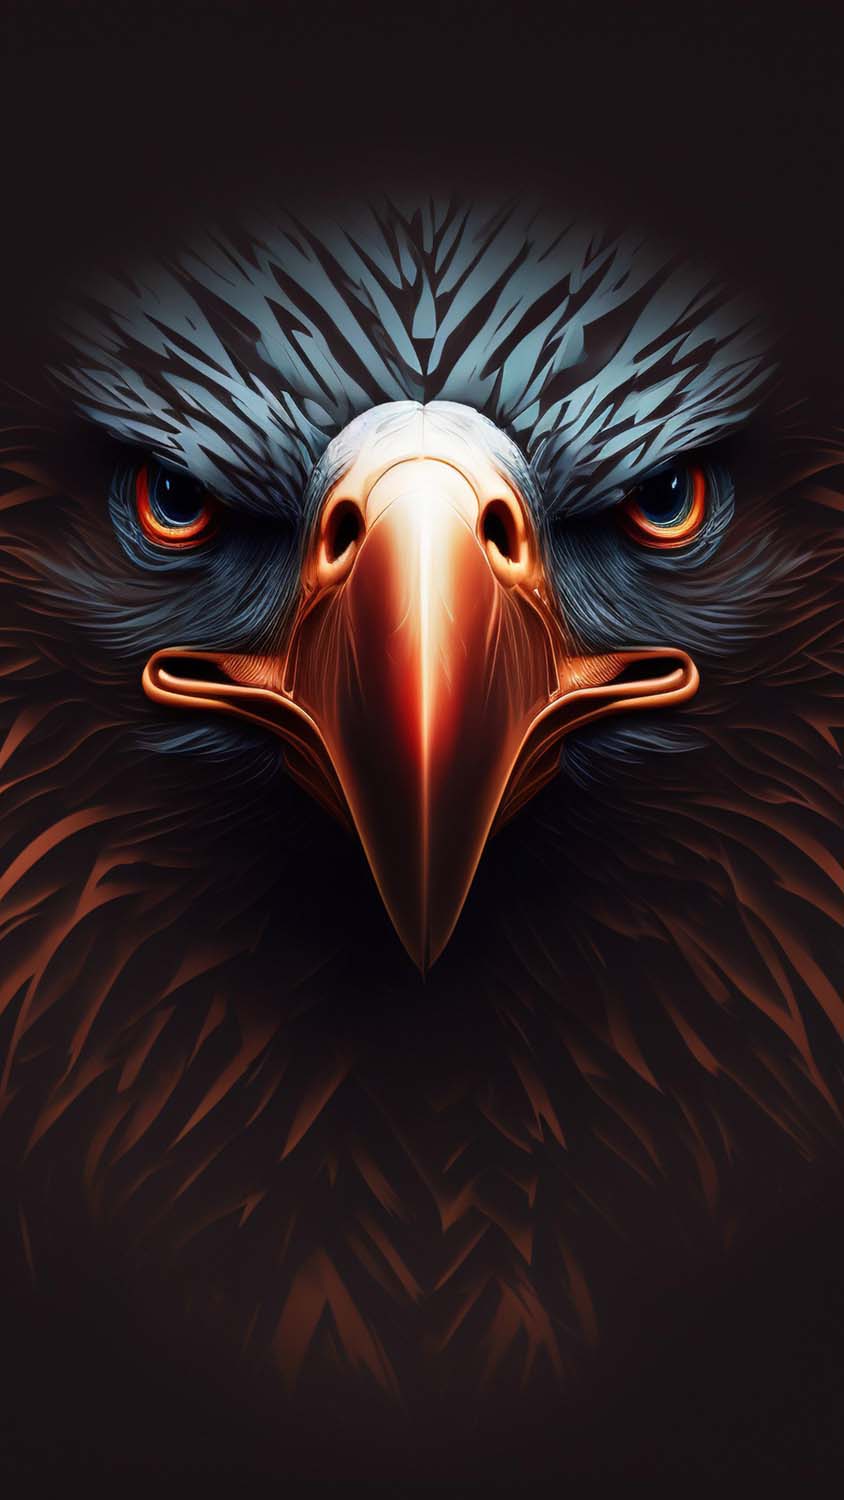 Eagle Face IPhone Wallpaper HD - IPhone Wallpapers : iPhone Wallpapers